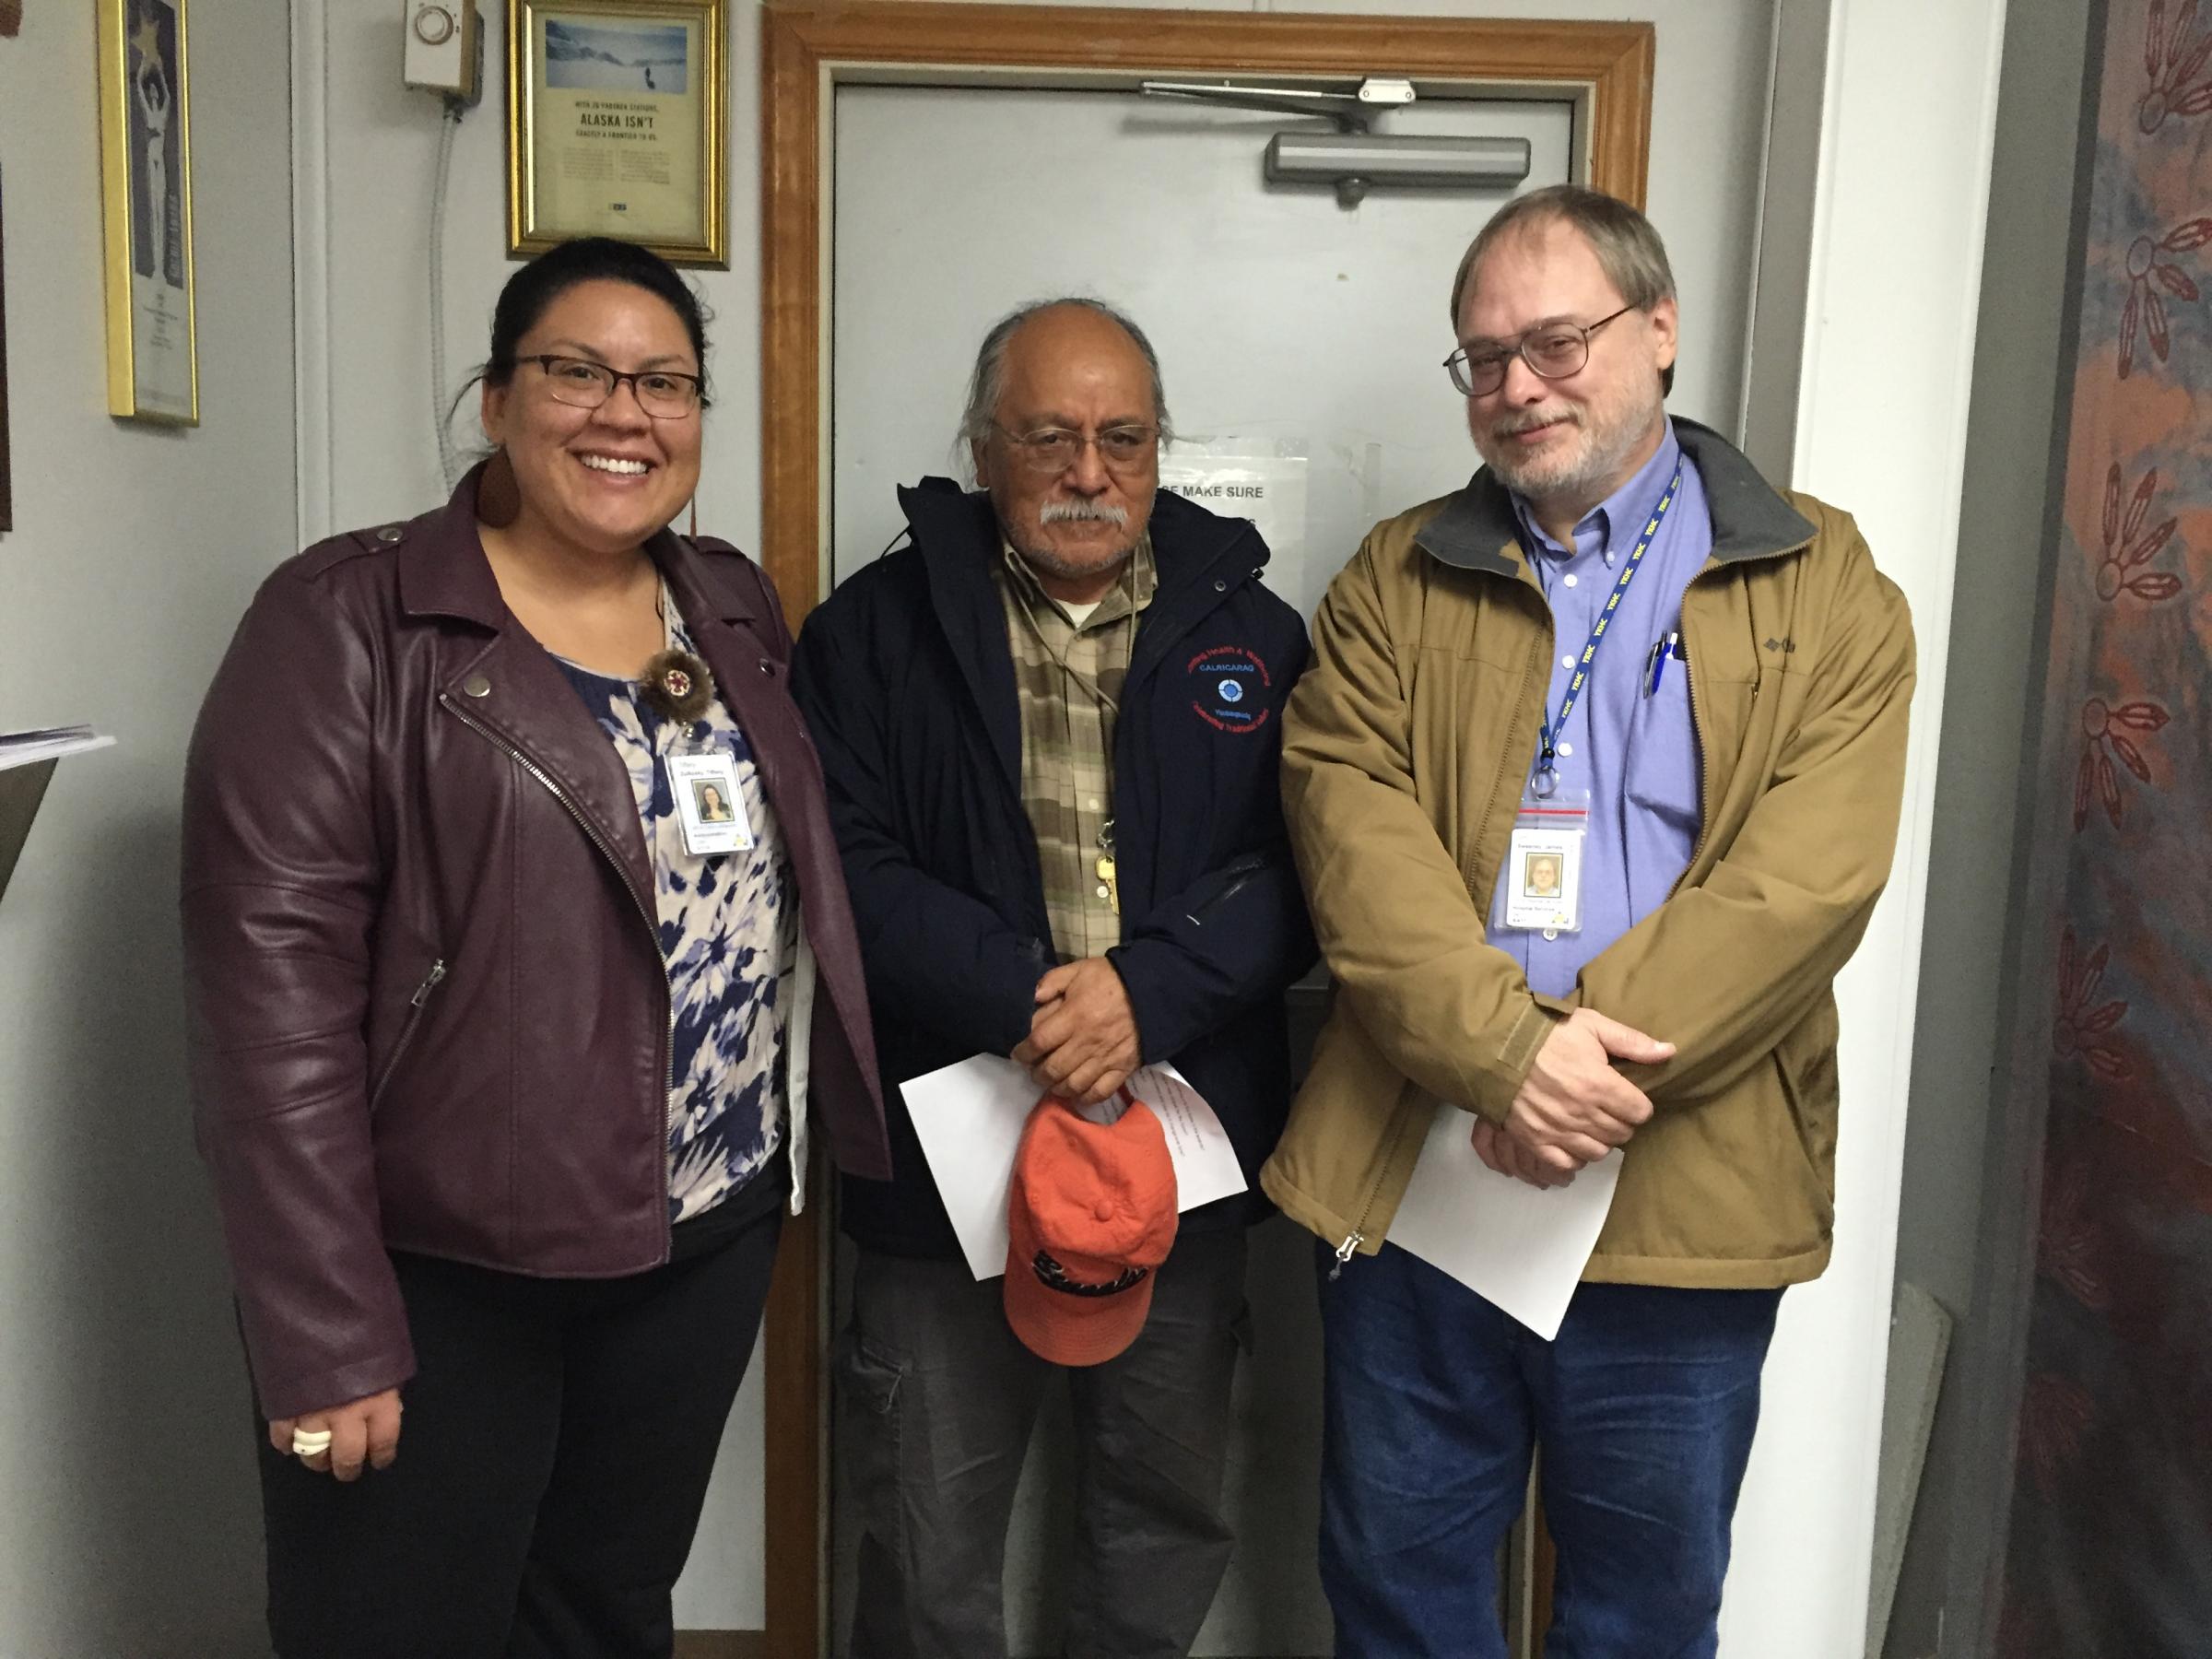 Left to right: YKHC VP of Communications Tiffany Zulkosky, Behavioral Health Administrator Ray Daw, and VP of Hospital Services Jim Sweeney. (Photo by Charles Enoch, KYUK - Bethel)